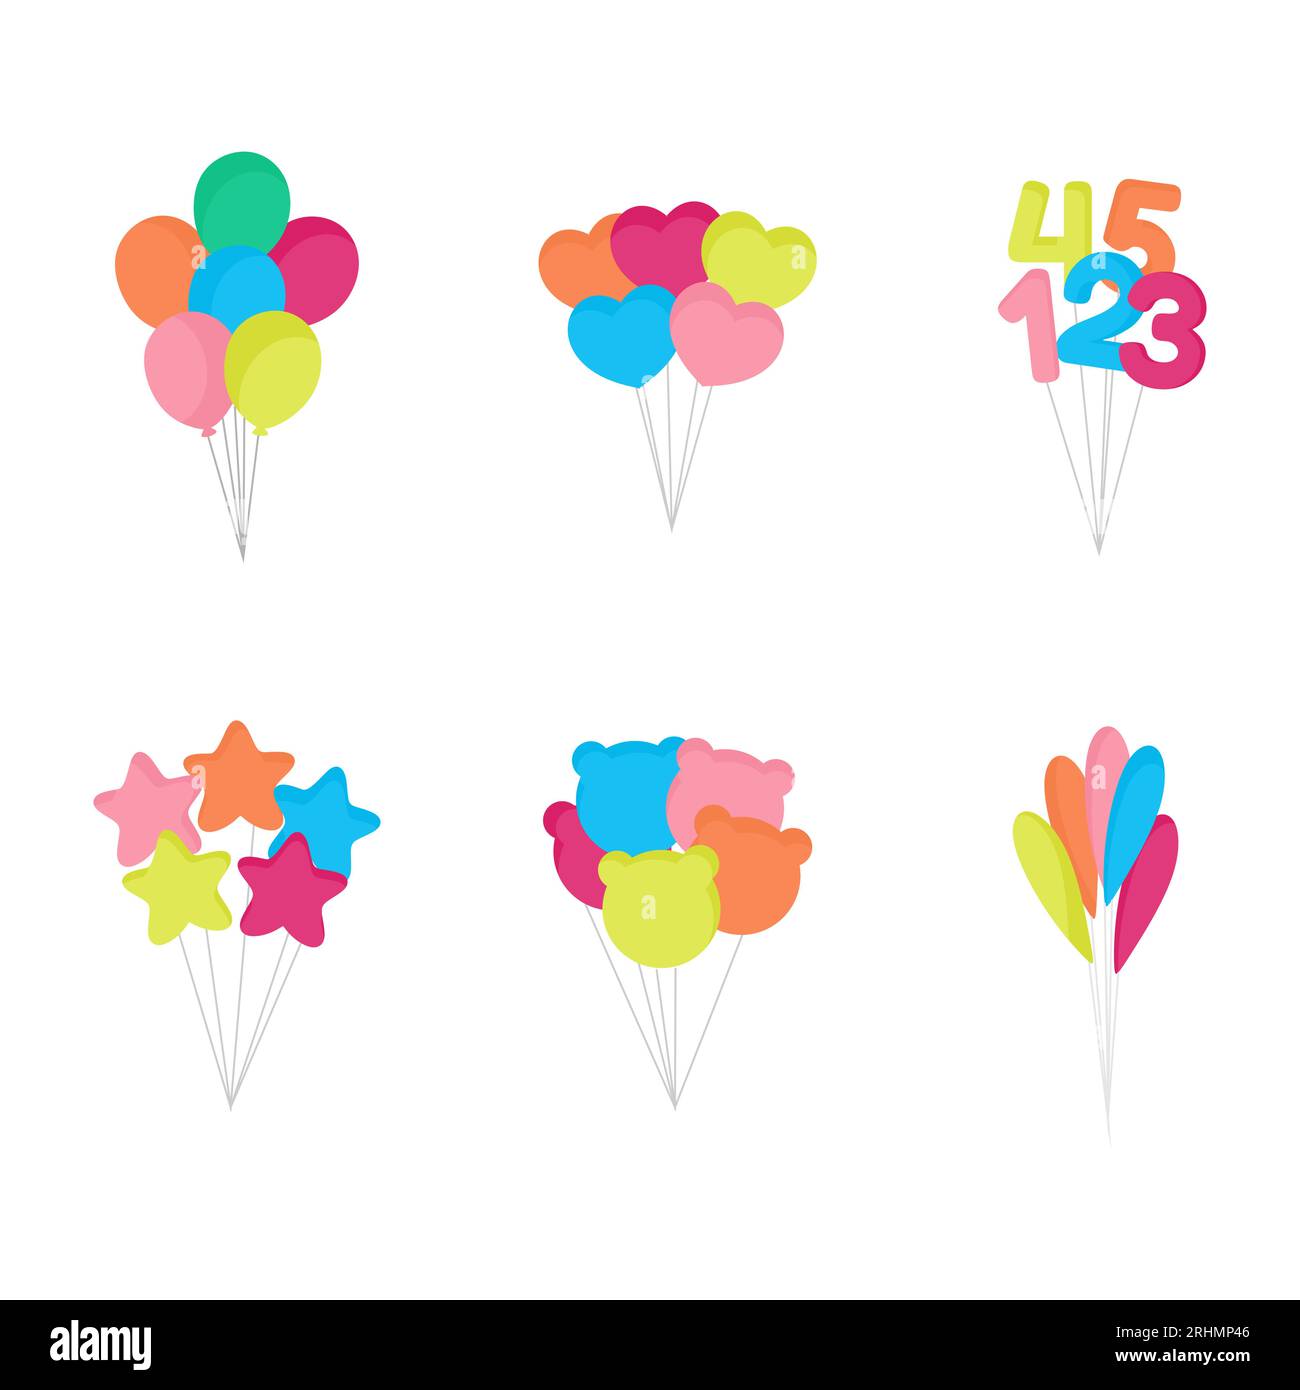 Vector illustration of colorful balloons on strings Stock Vector